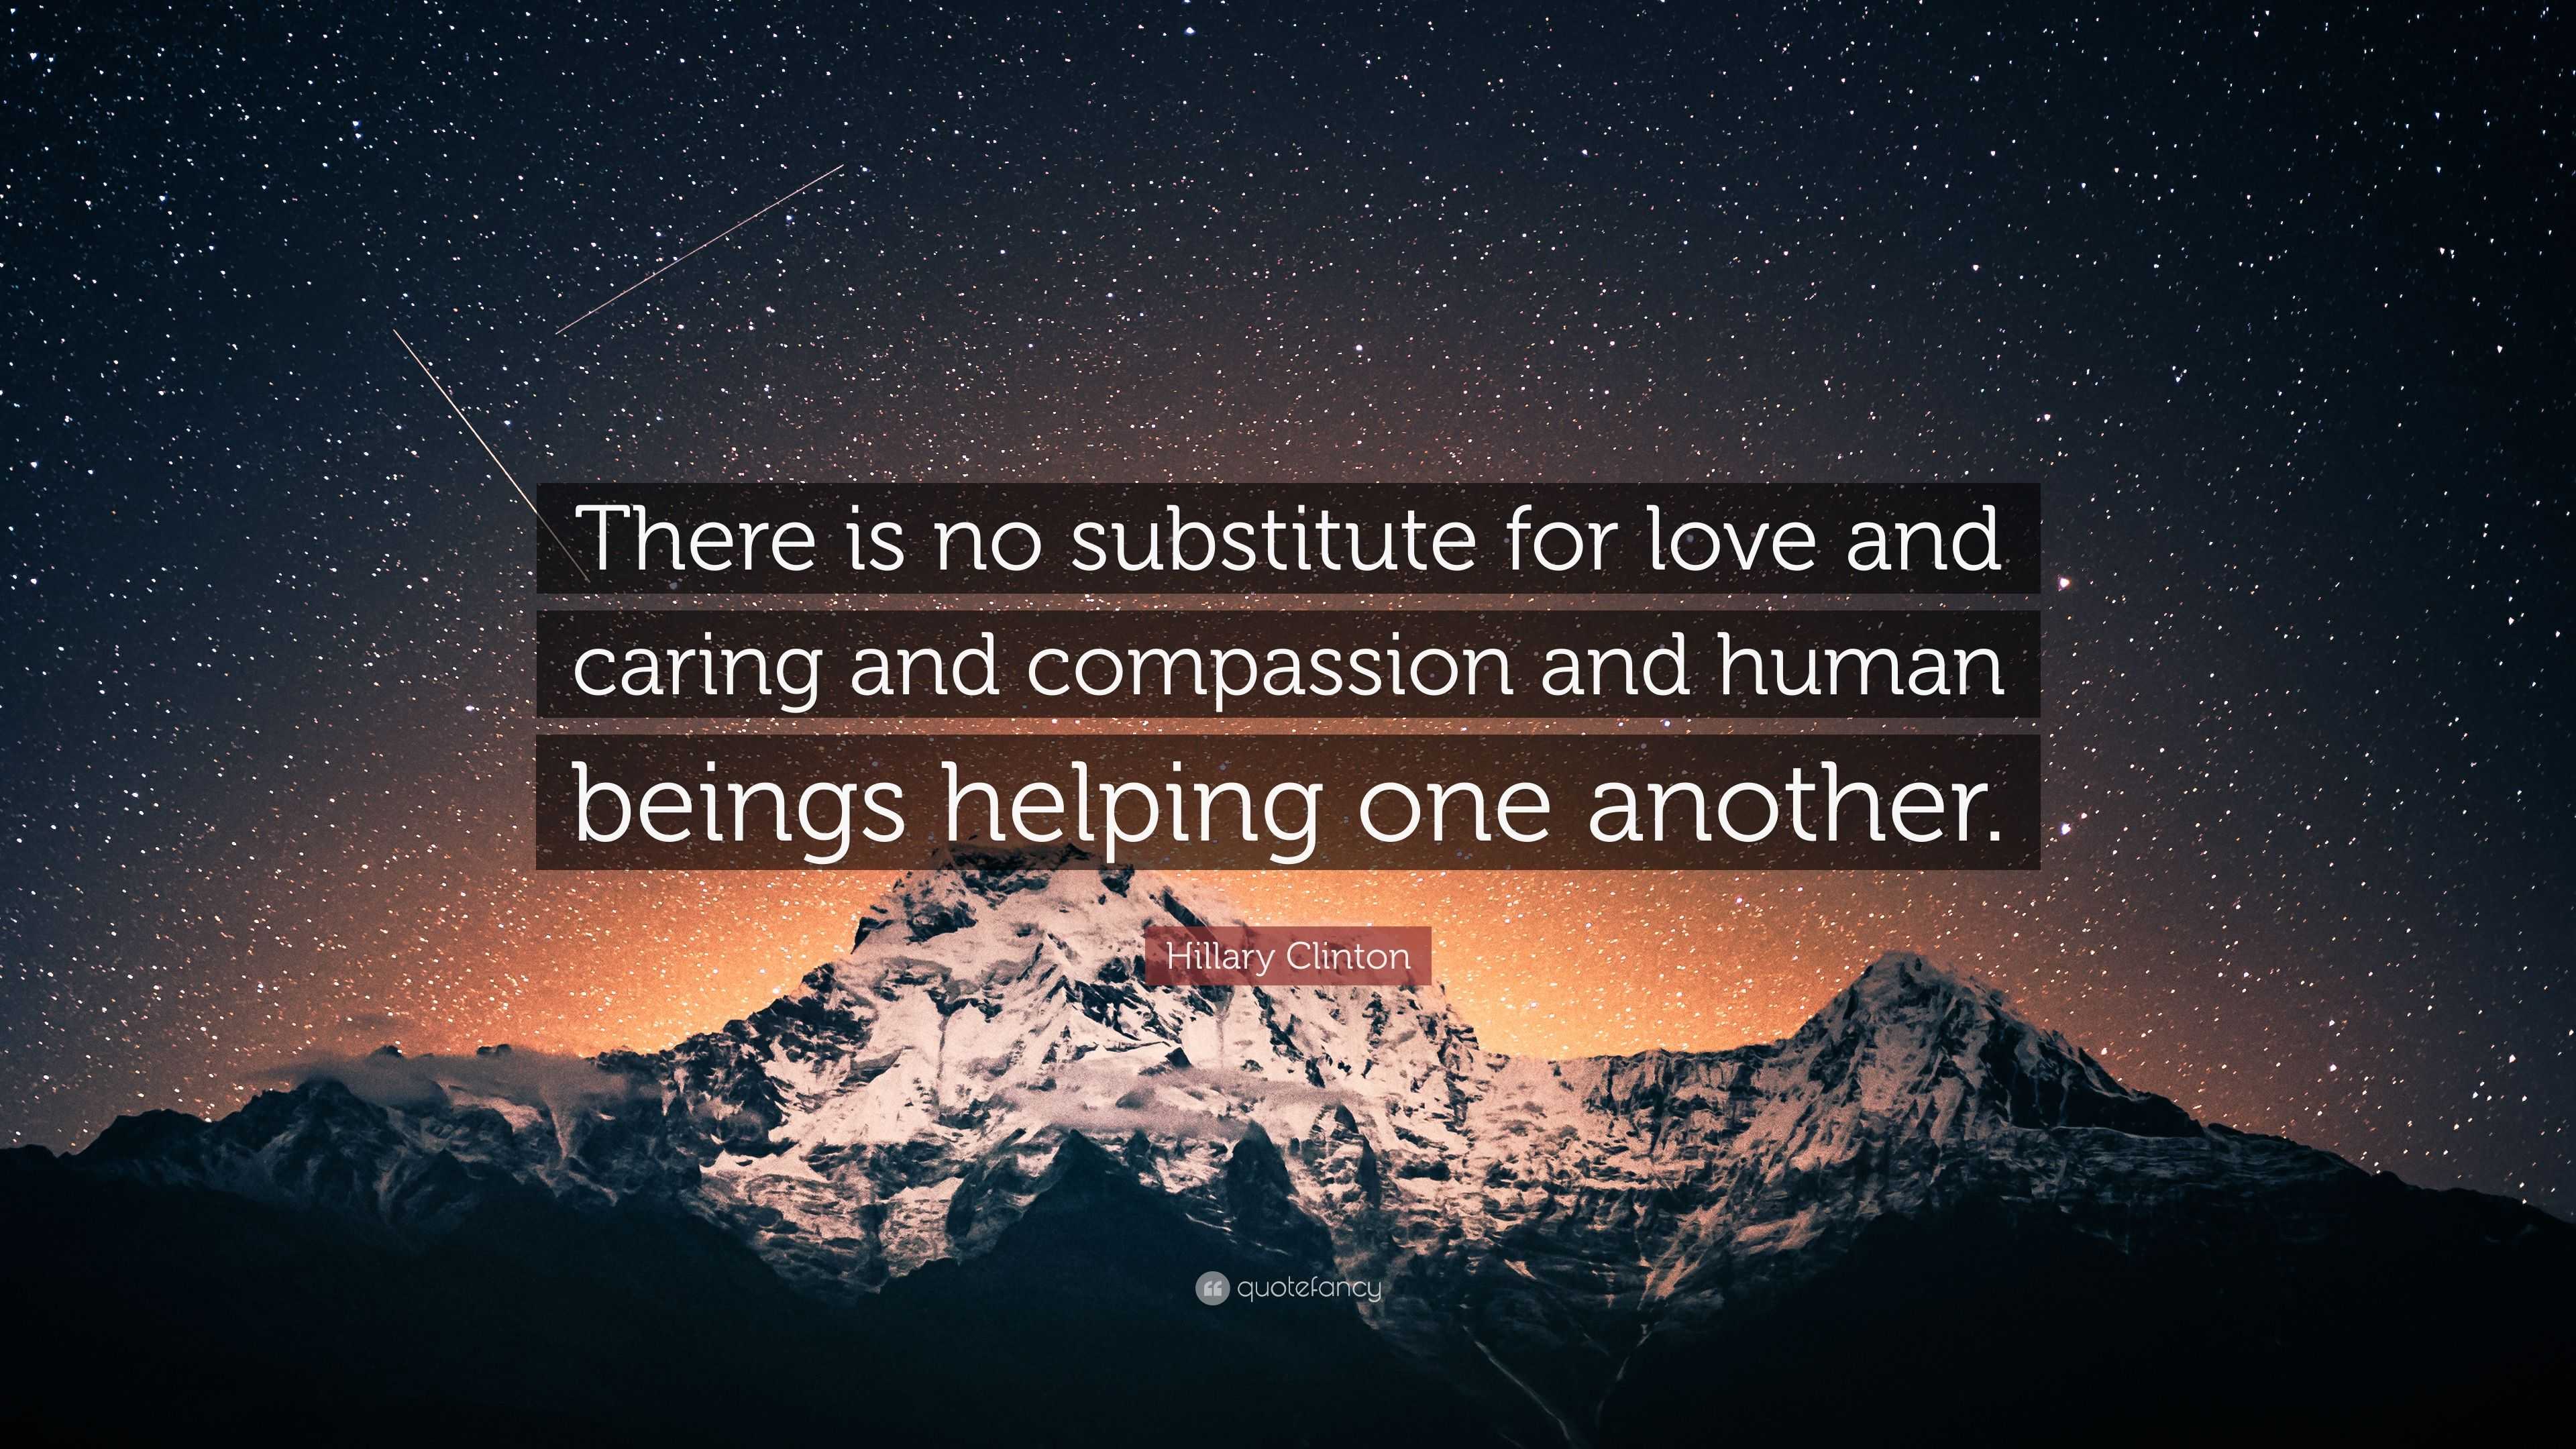 Hillary Clinton Quote “there Is No Substitute For Love And Caring And Compassion And Human